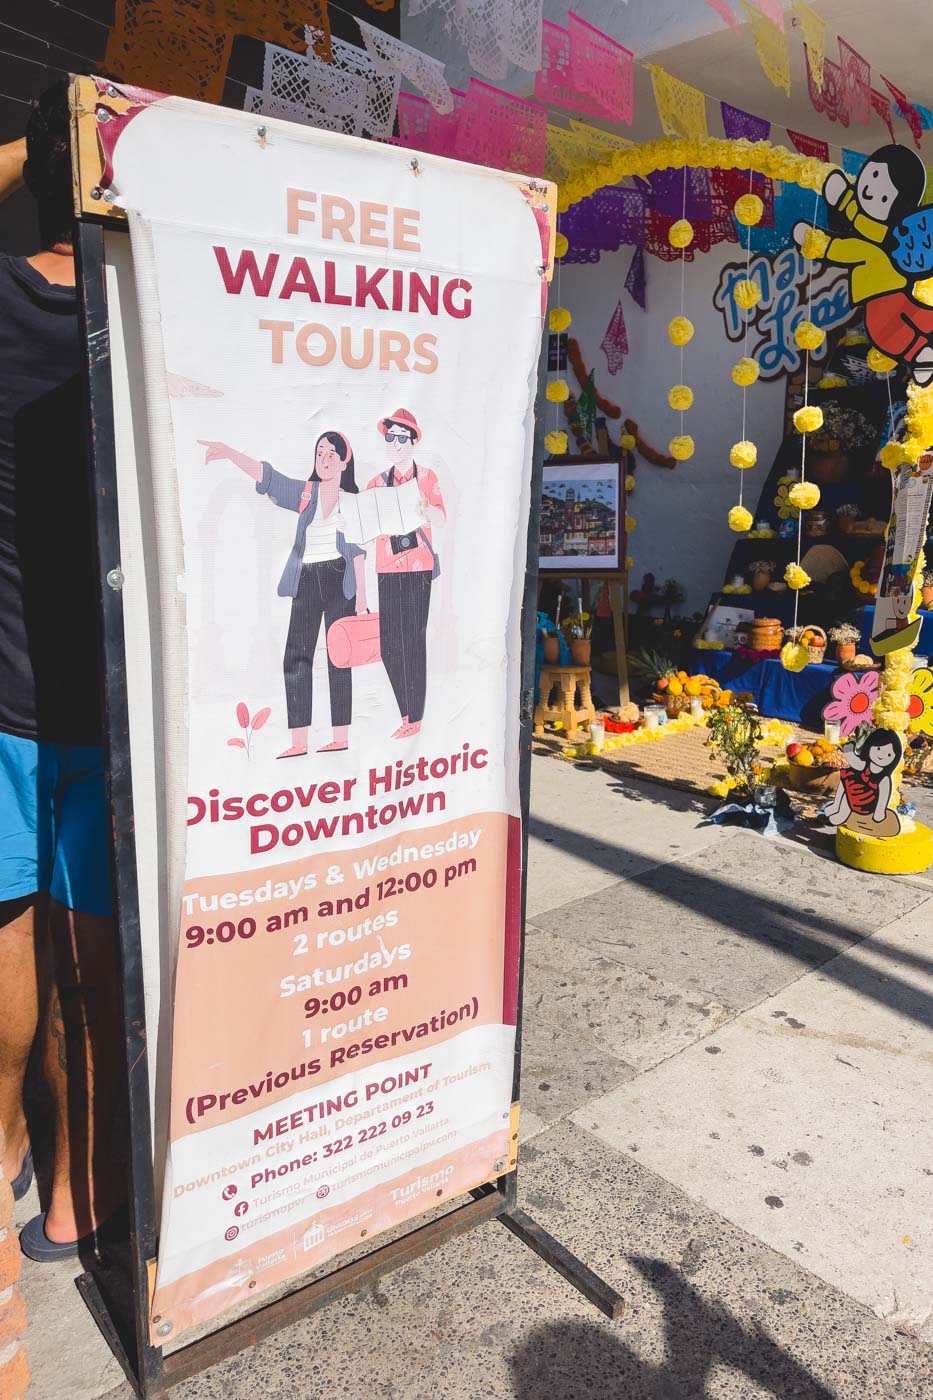 An information sign depicting free walking tours and their schedules in Puerto Vallarta.